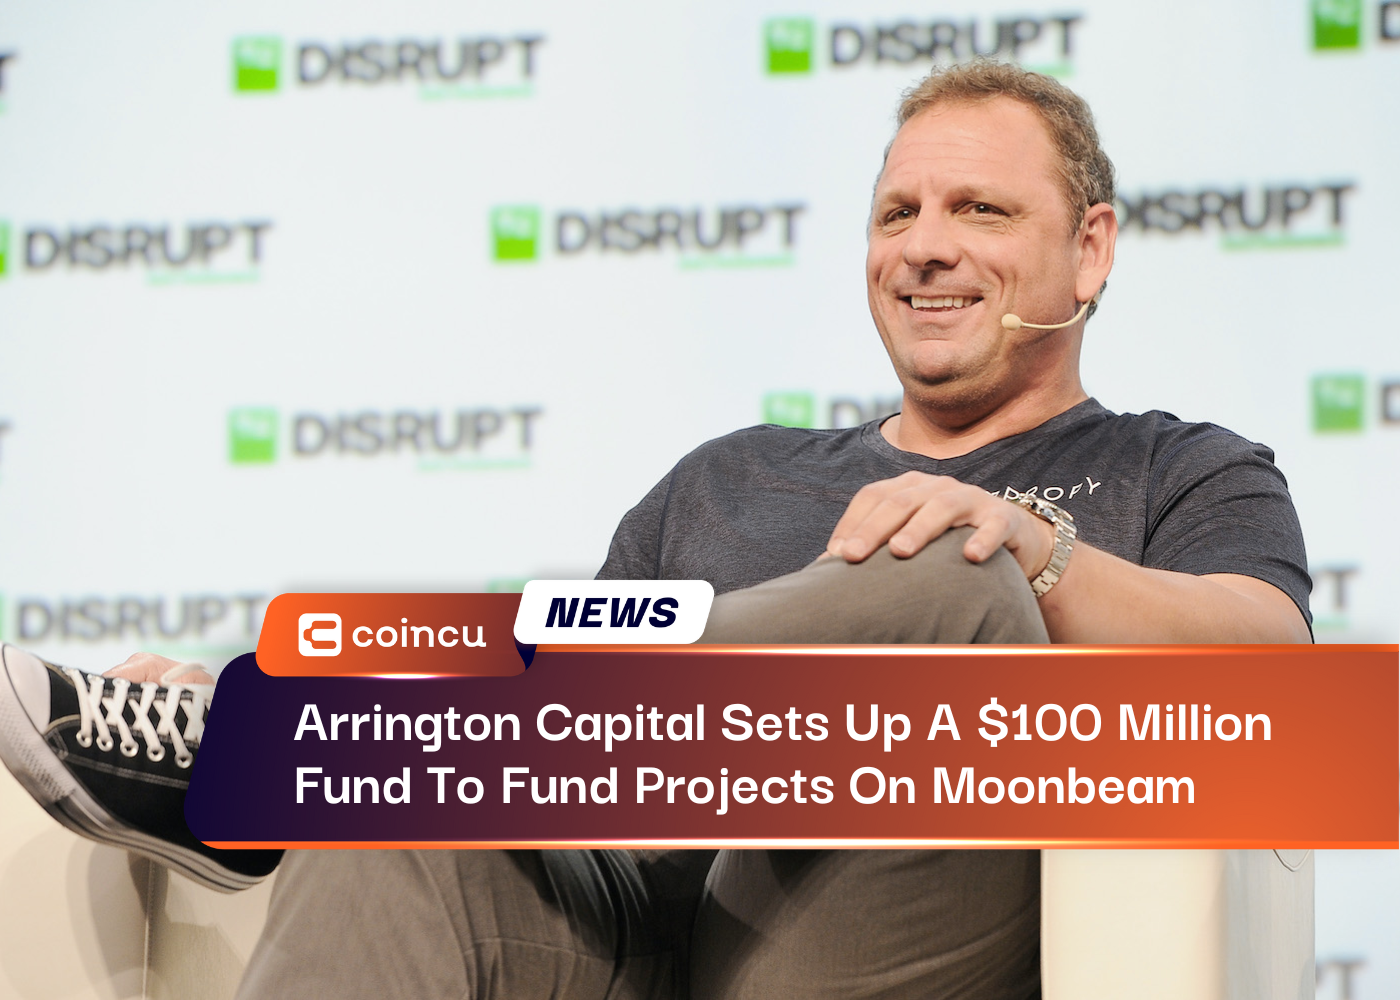 Arrington Capital Sets Up A $100 Million Fund To Fund Projects On Moonbeam